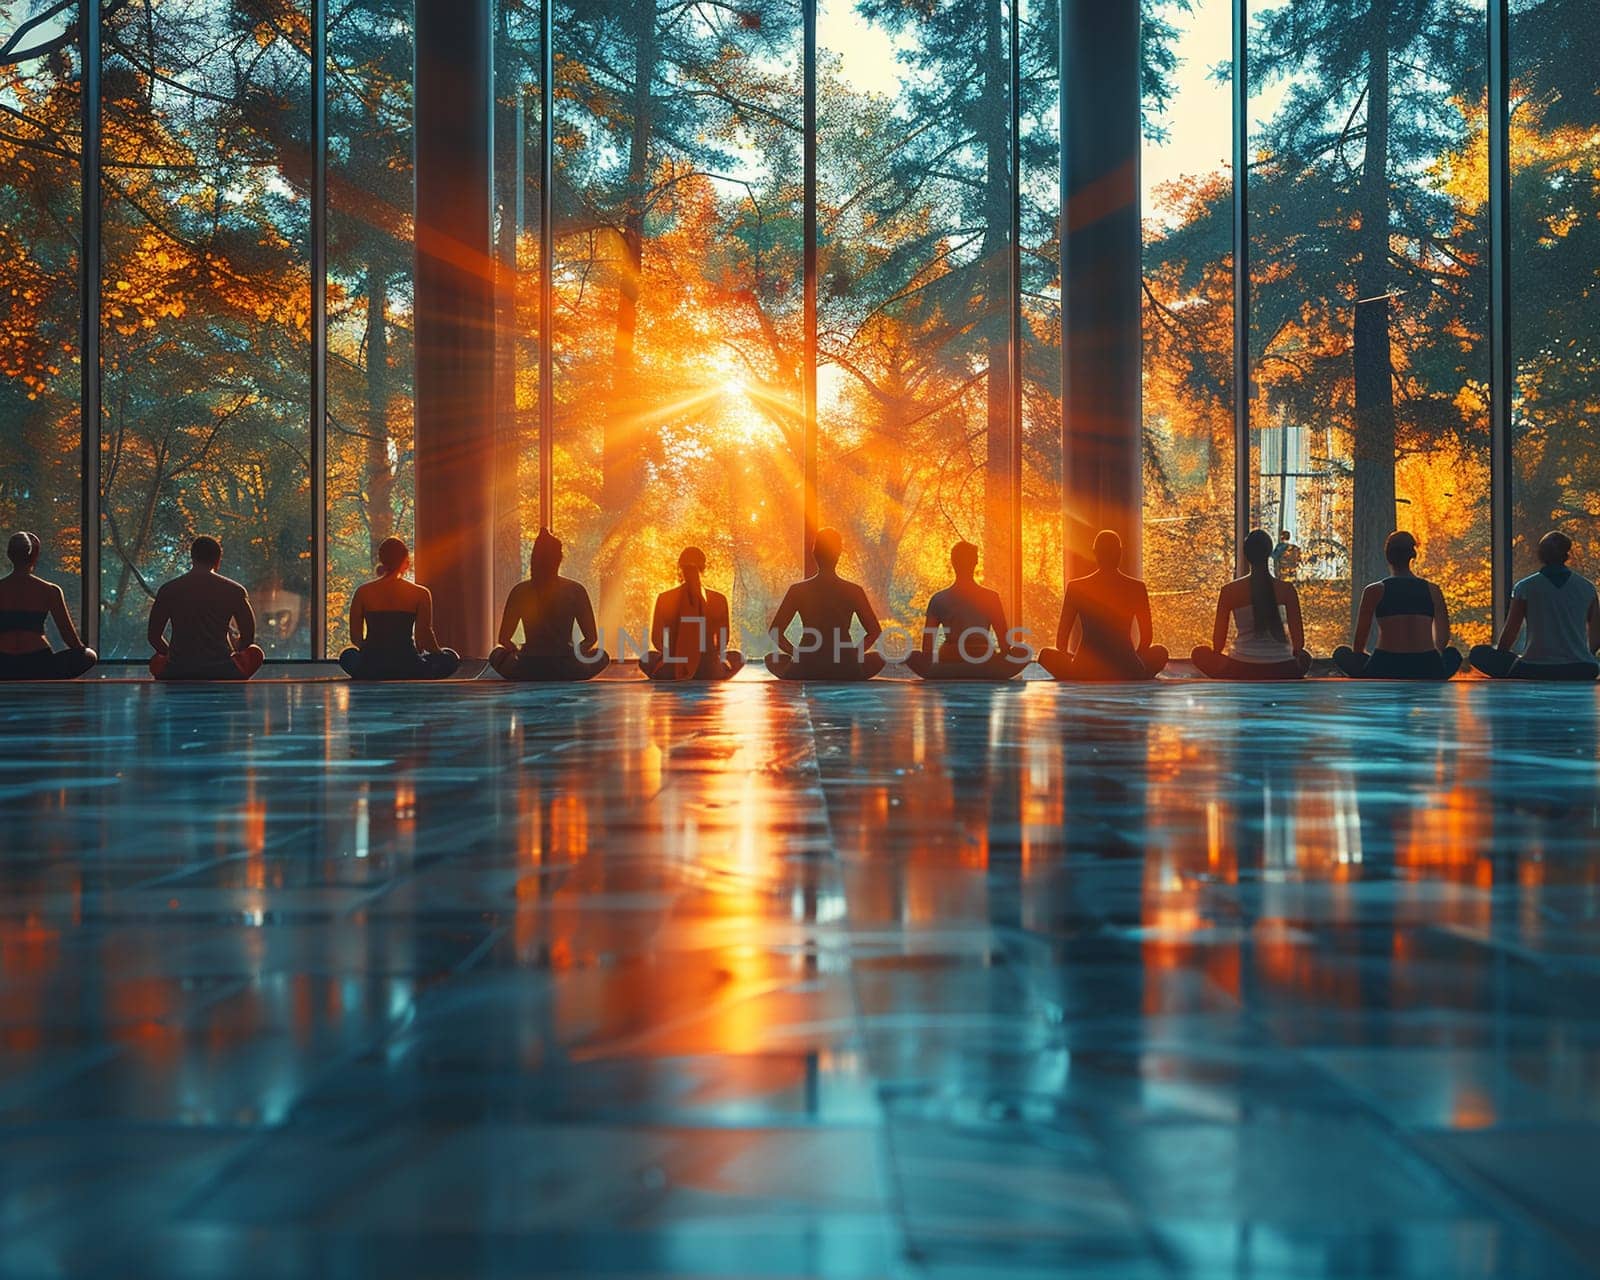 Serene Yoga Class in Session at a Sunlit Wellness Center, The tranquil blur of figures in poses against the morning light emphasizes balance and harmony.